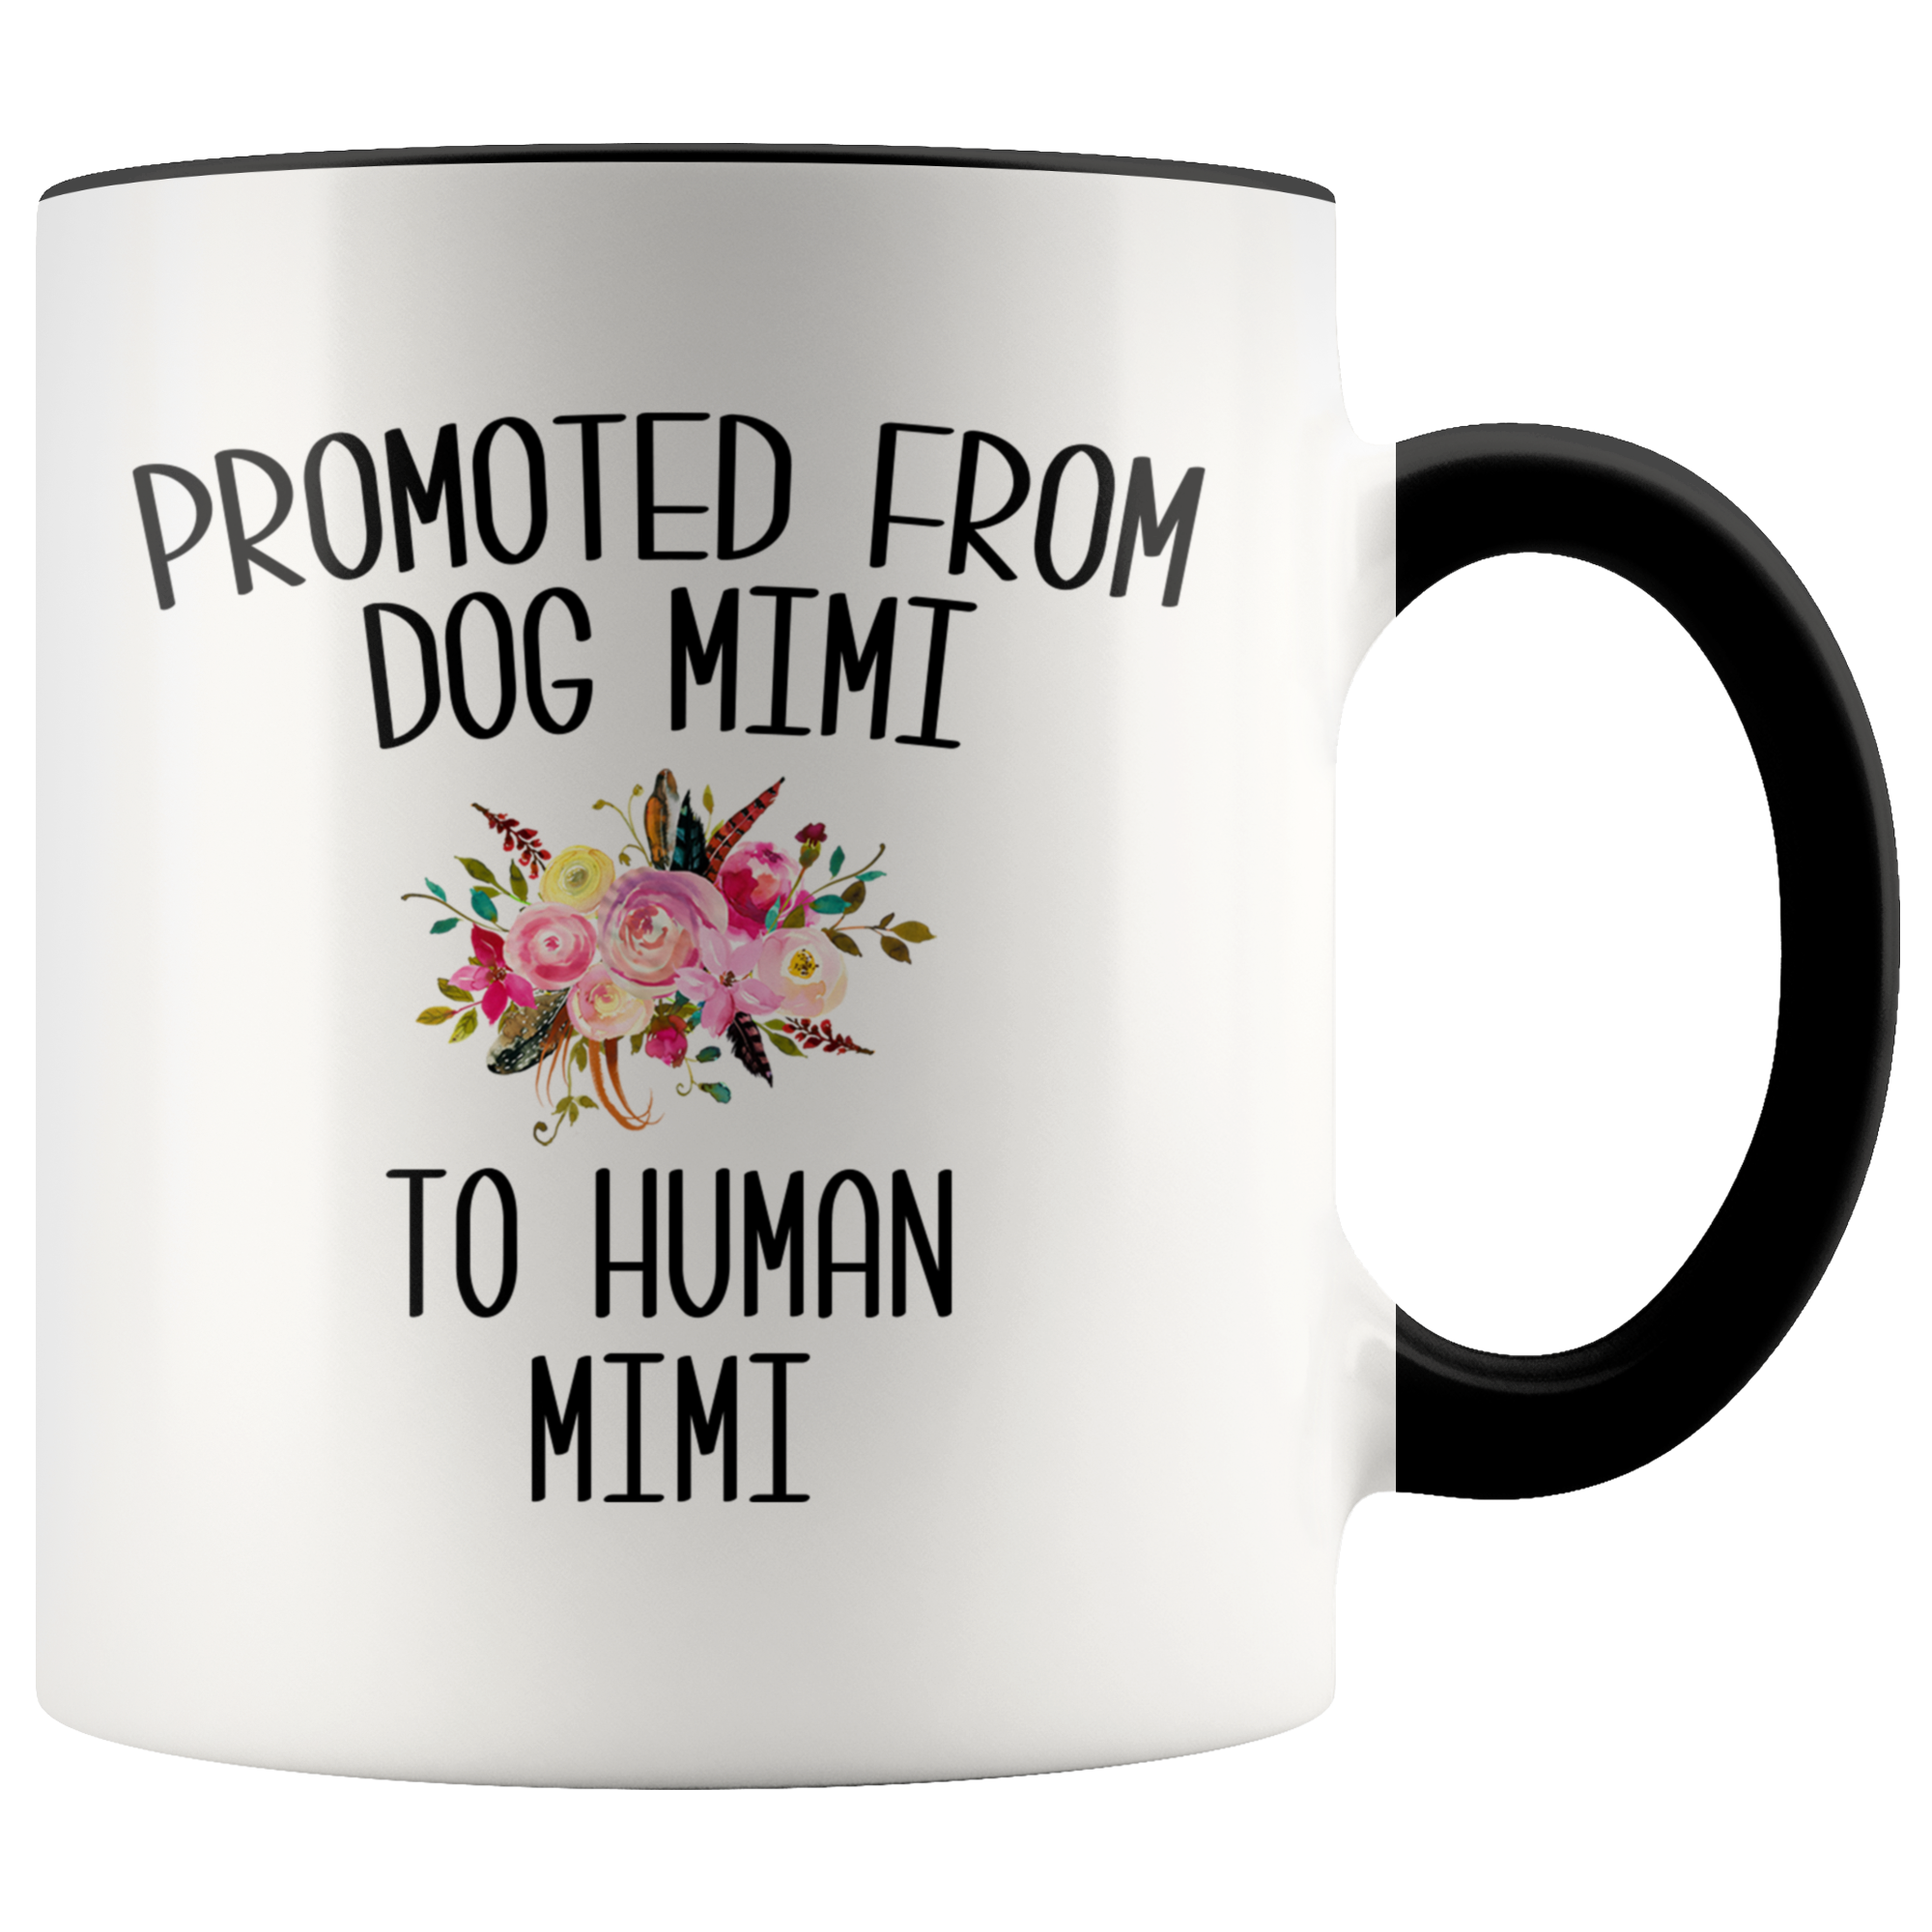 Promoted From Dog Mimi To Human Mimi Coffee Mug Pregnancy Announcement Cup Baby Reveal Gift for Her